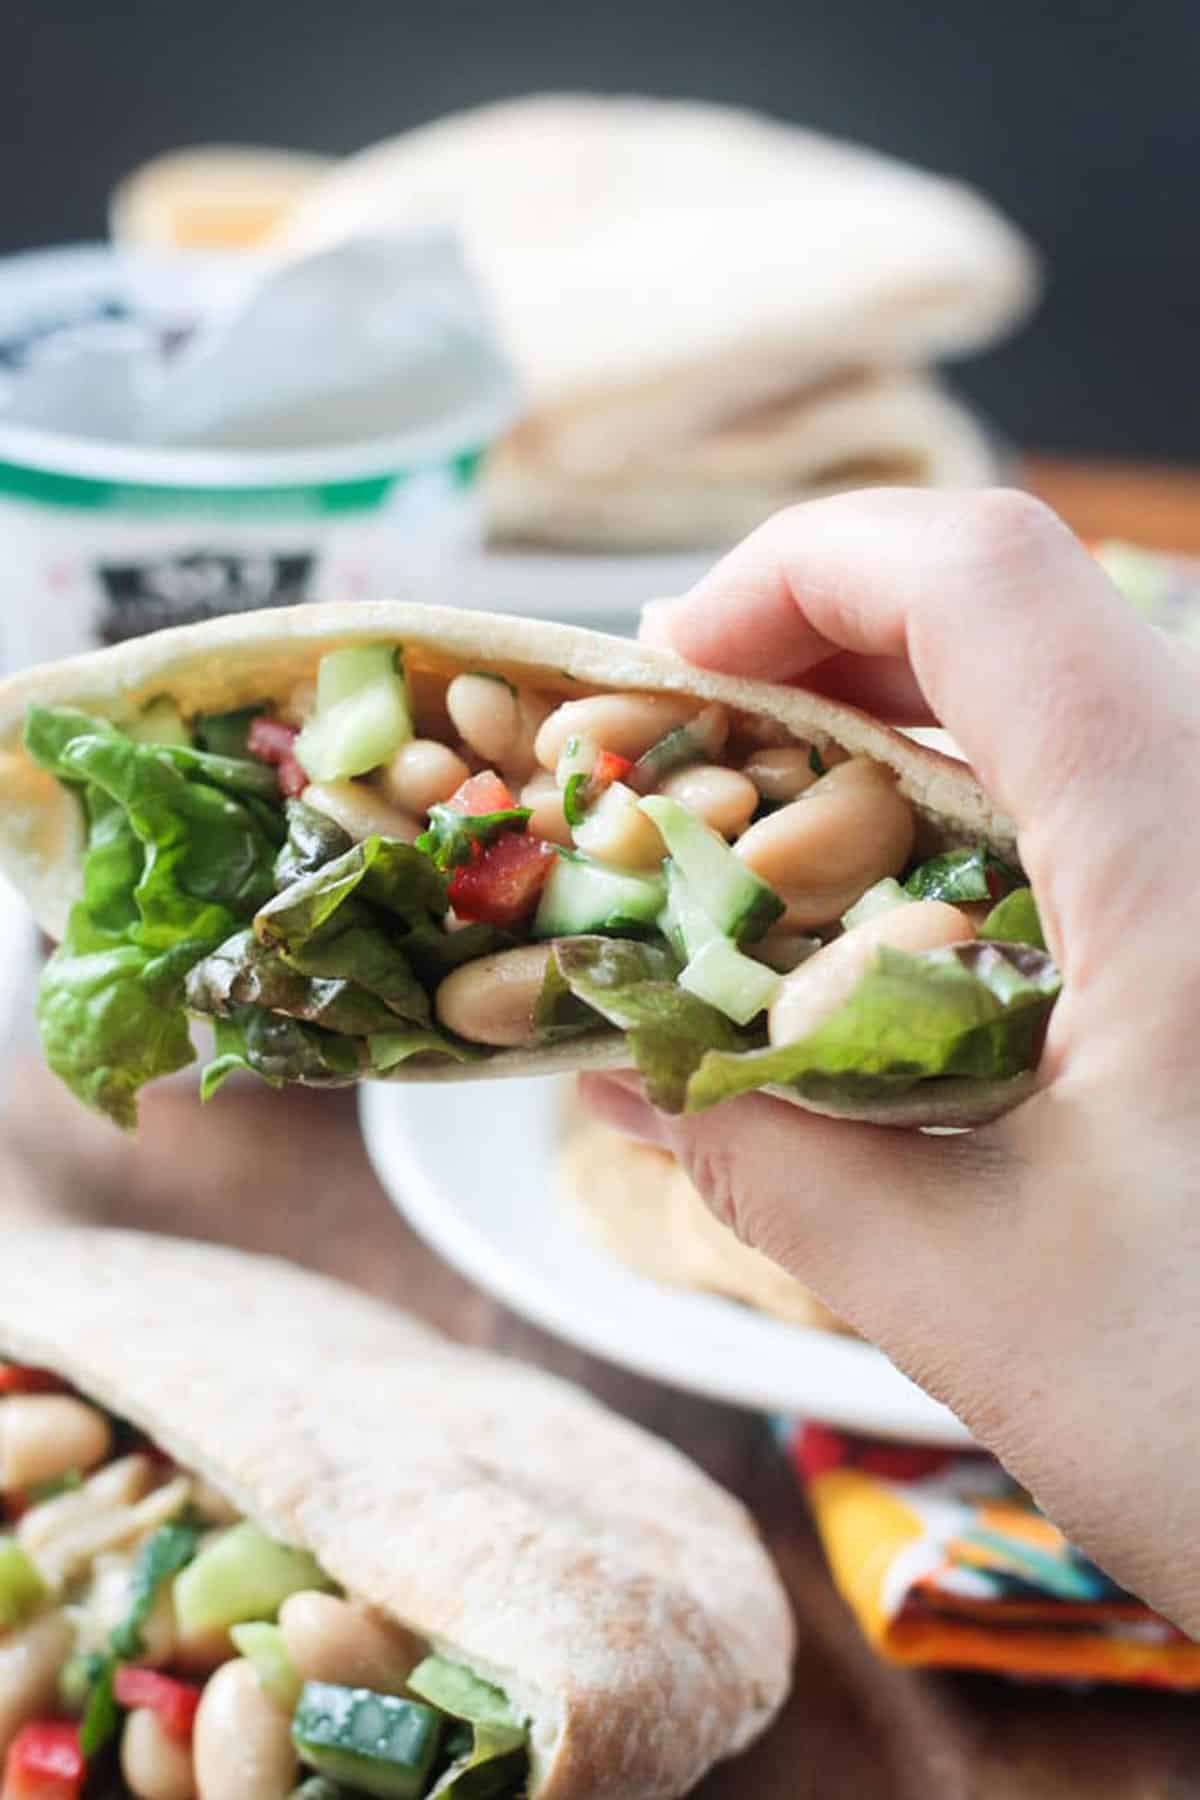 Hand holding a pita pocket filled with white bean salad.